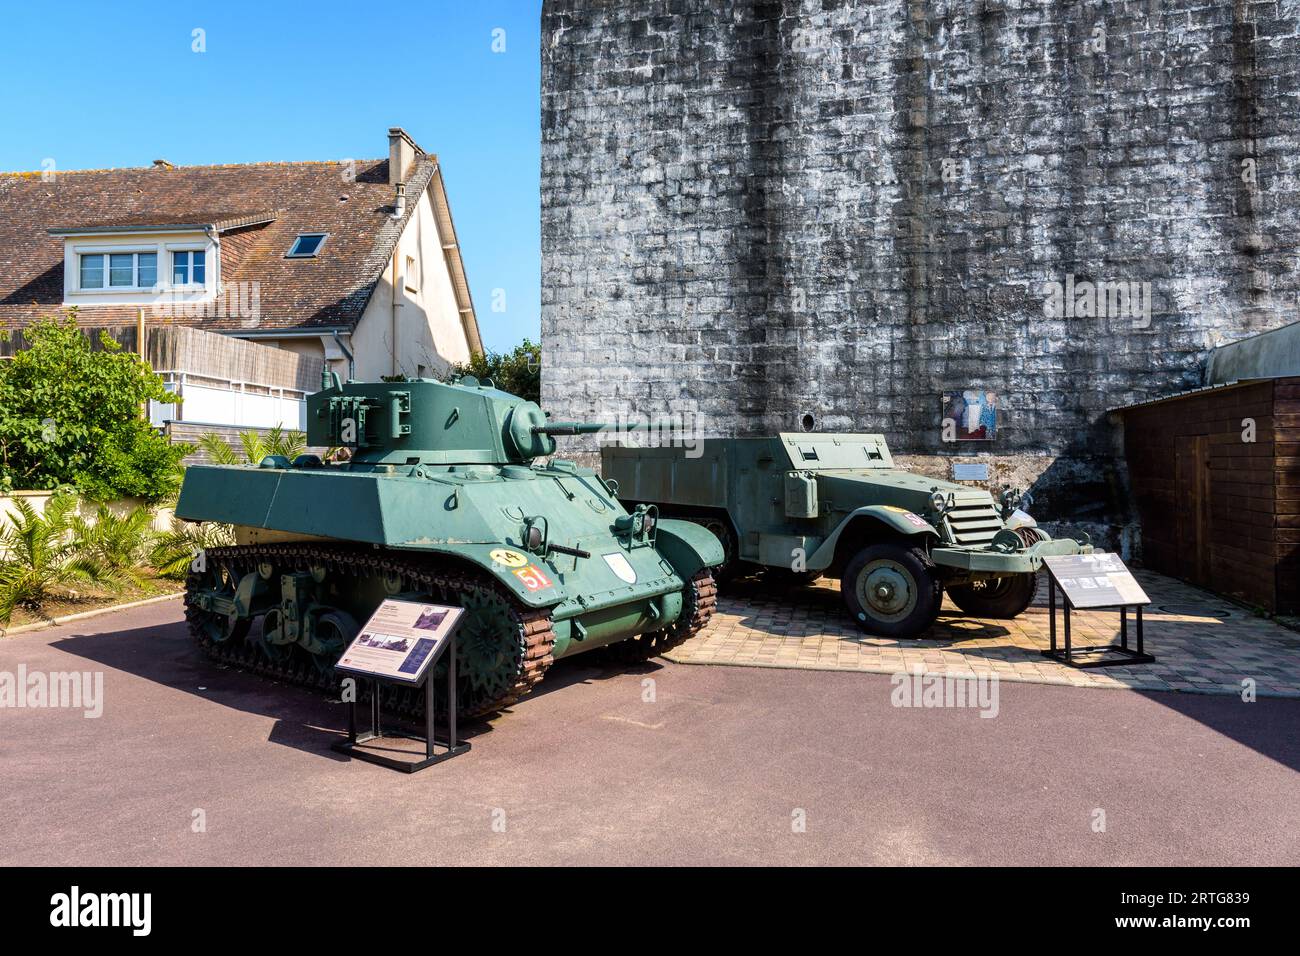 https://c8.alamy.com/comp/2RTG839/an-m3-stuart-light-tank-and-an-m3-half-track-outside-le-grand-bunker-a-former-german-bunker-converted-into-an-atlantic-wall-museum-in-ouistreham-2RTG839.jpg